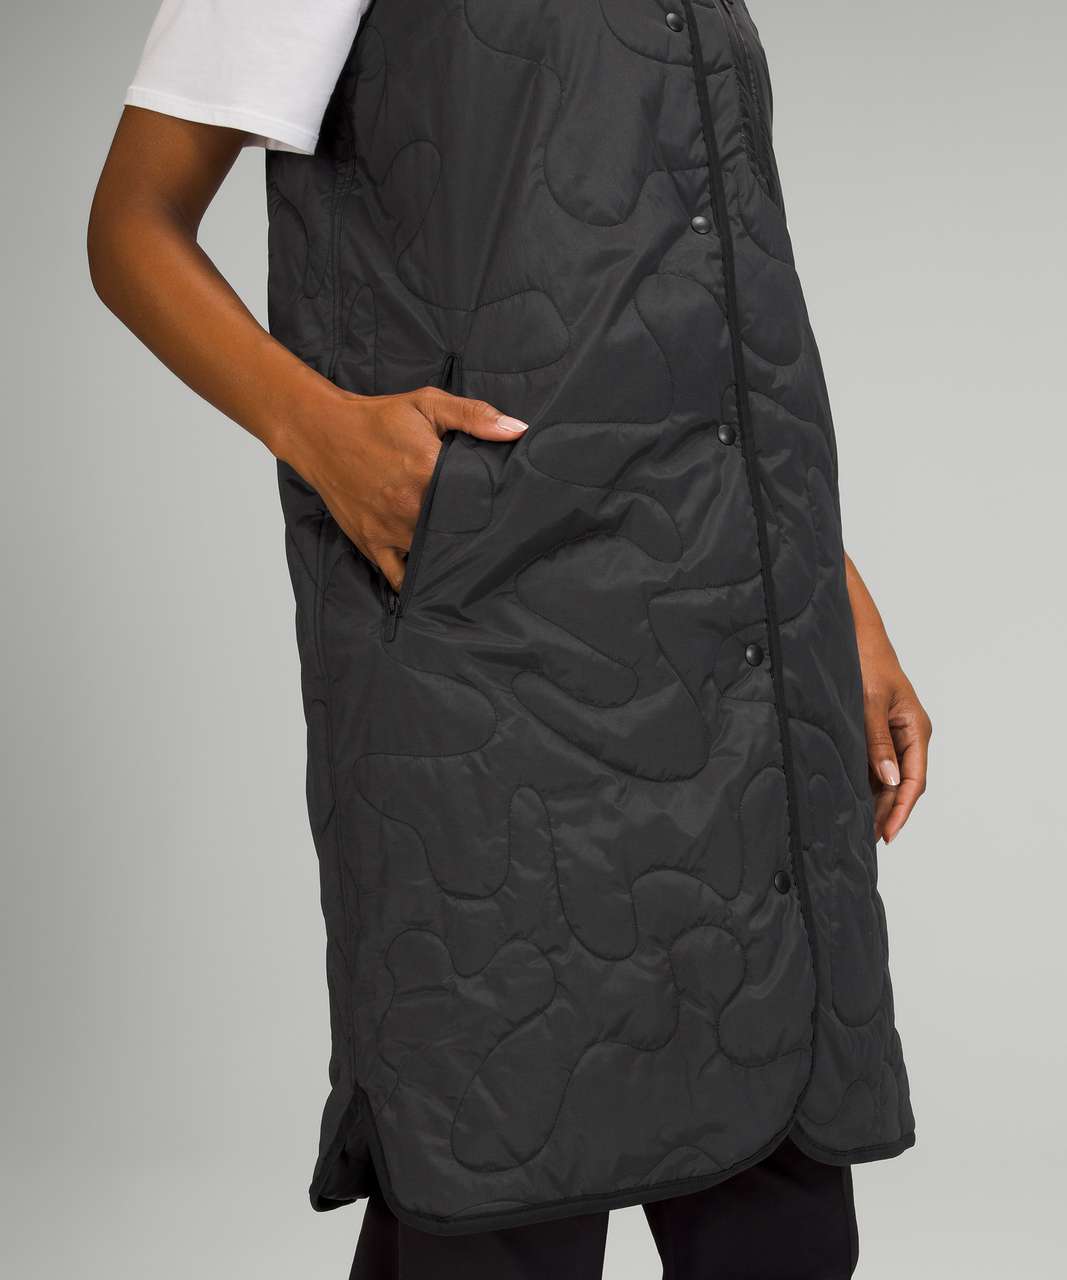 Lululemon Insulated Quilted Long Vest - Heathered Black